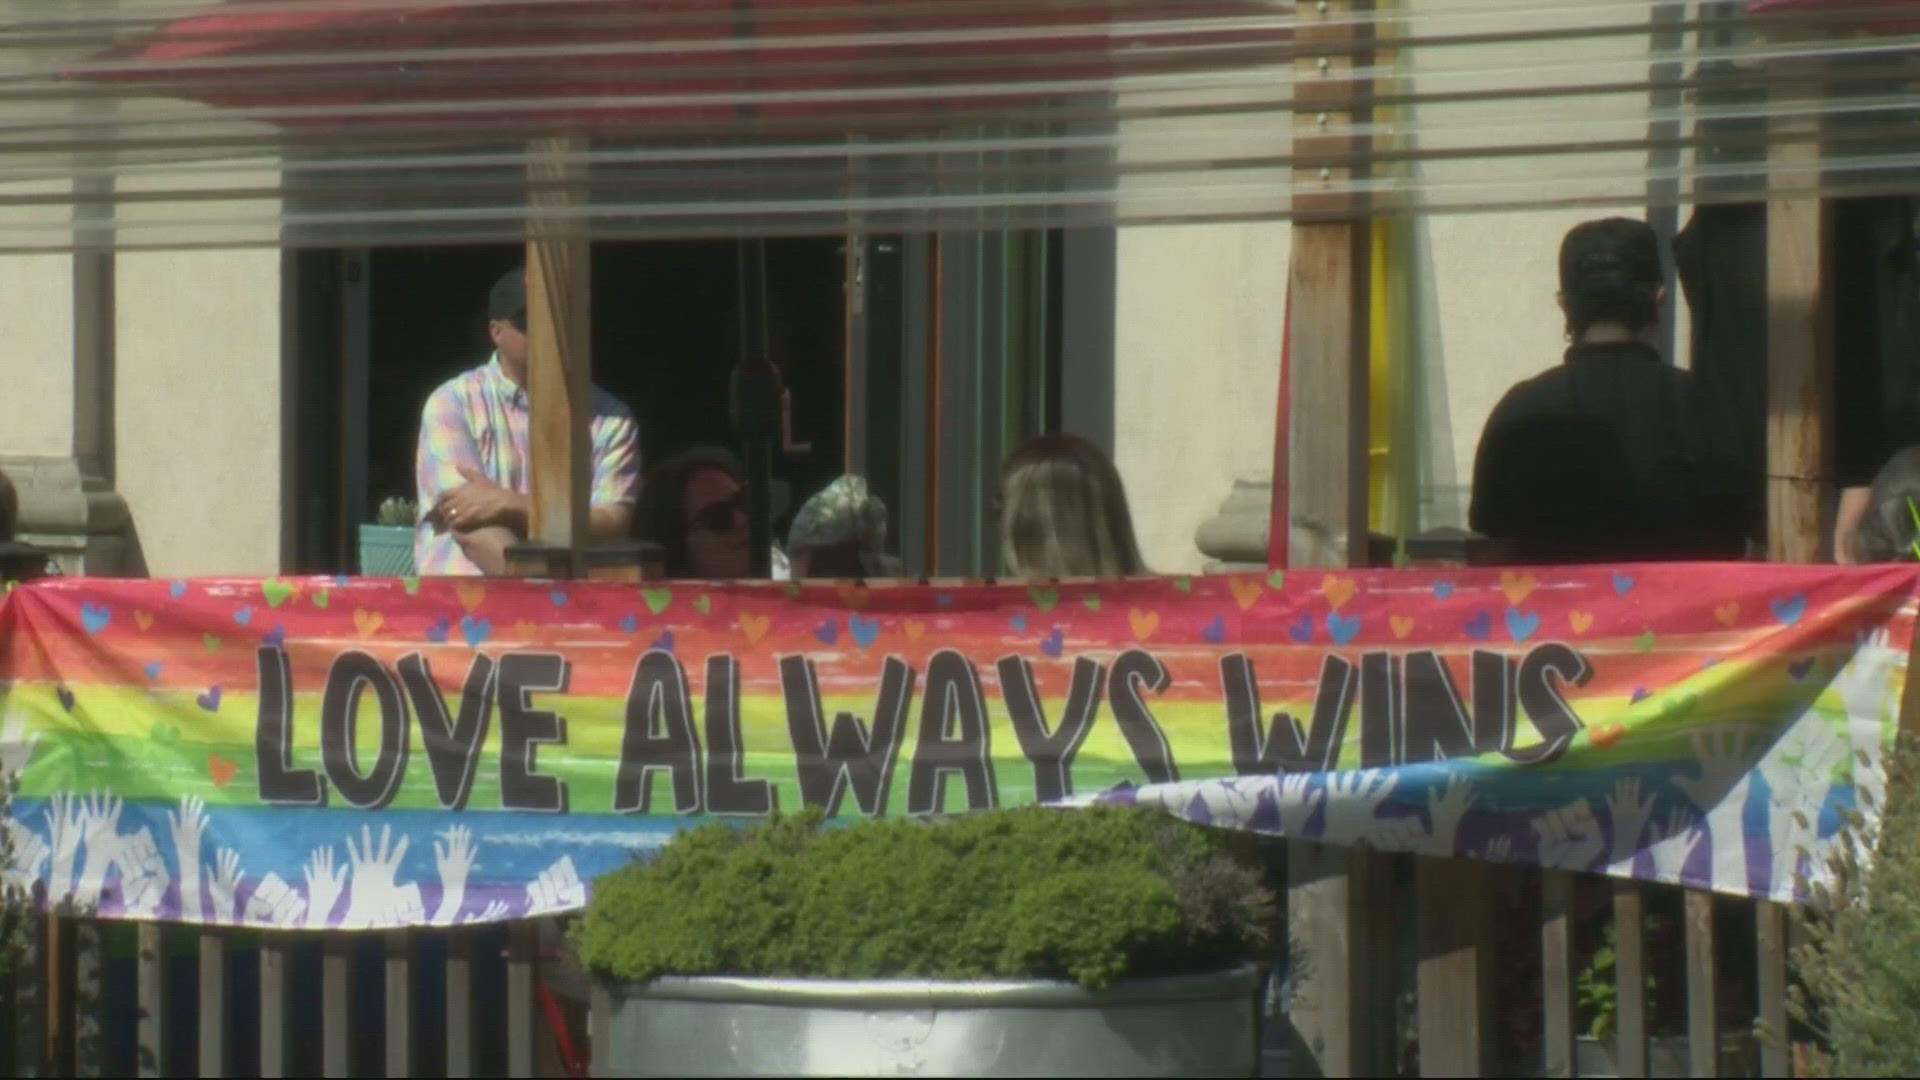 Organizers described it as round one of Oregon City Pride. Organizers said they’re already working on plans for round two.